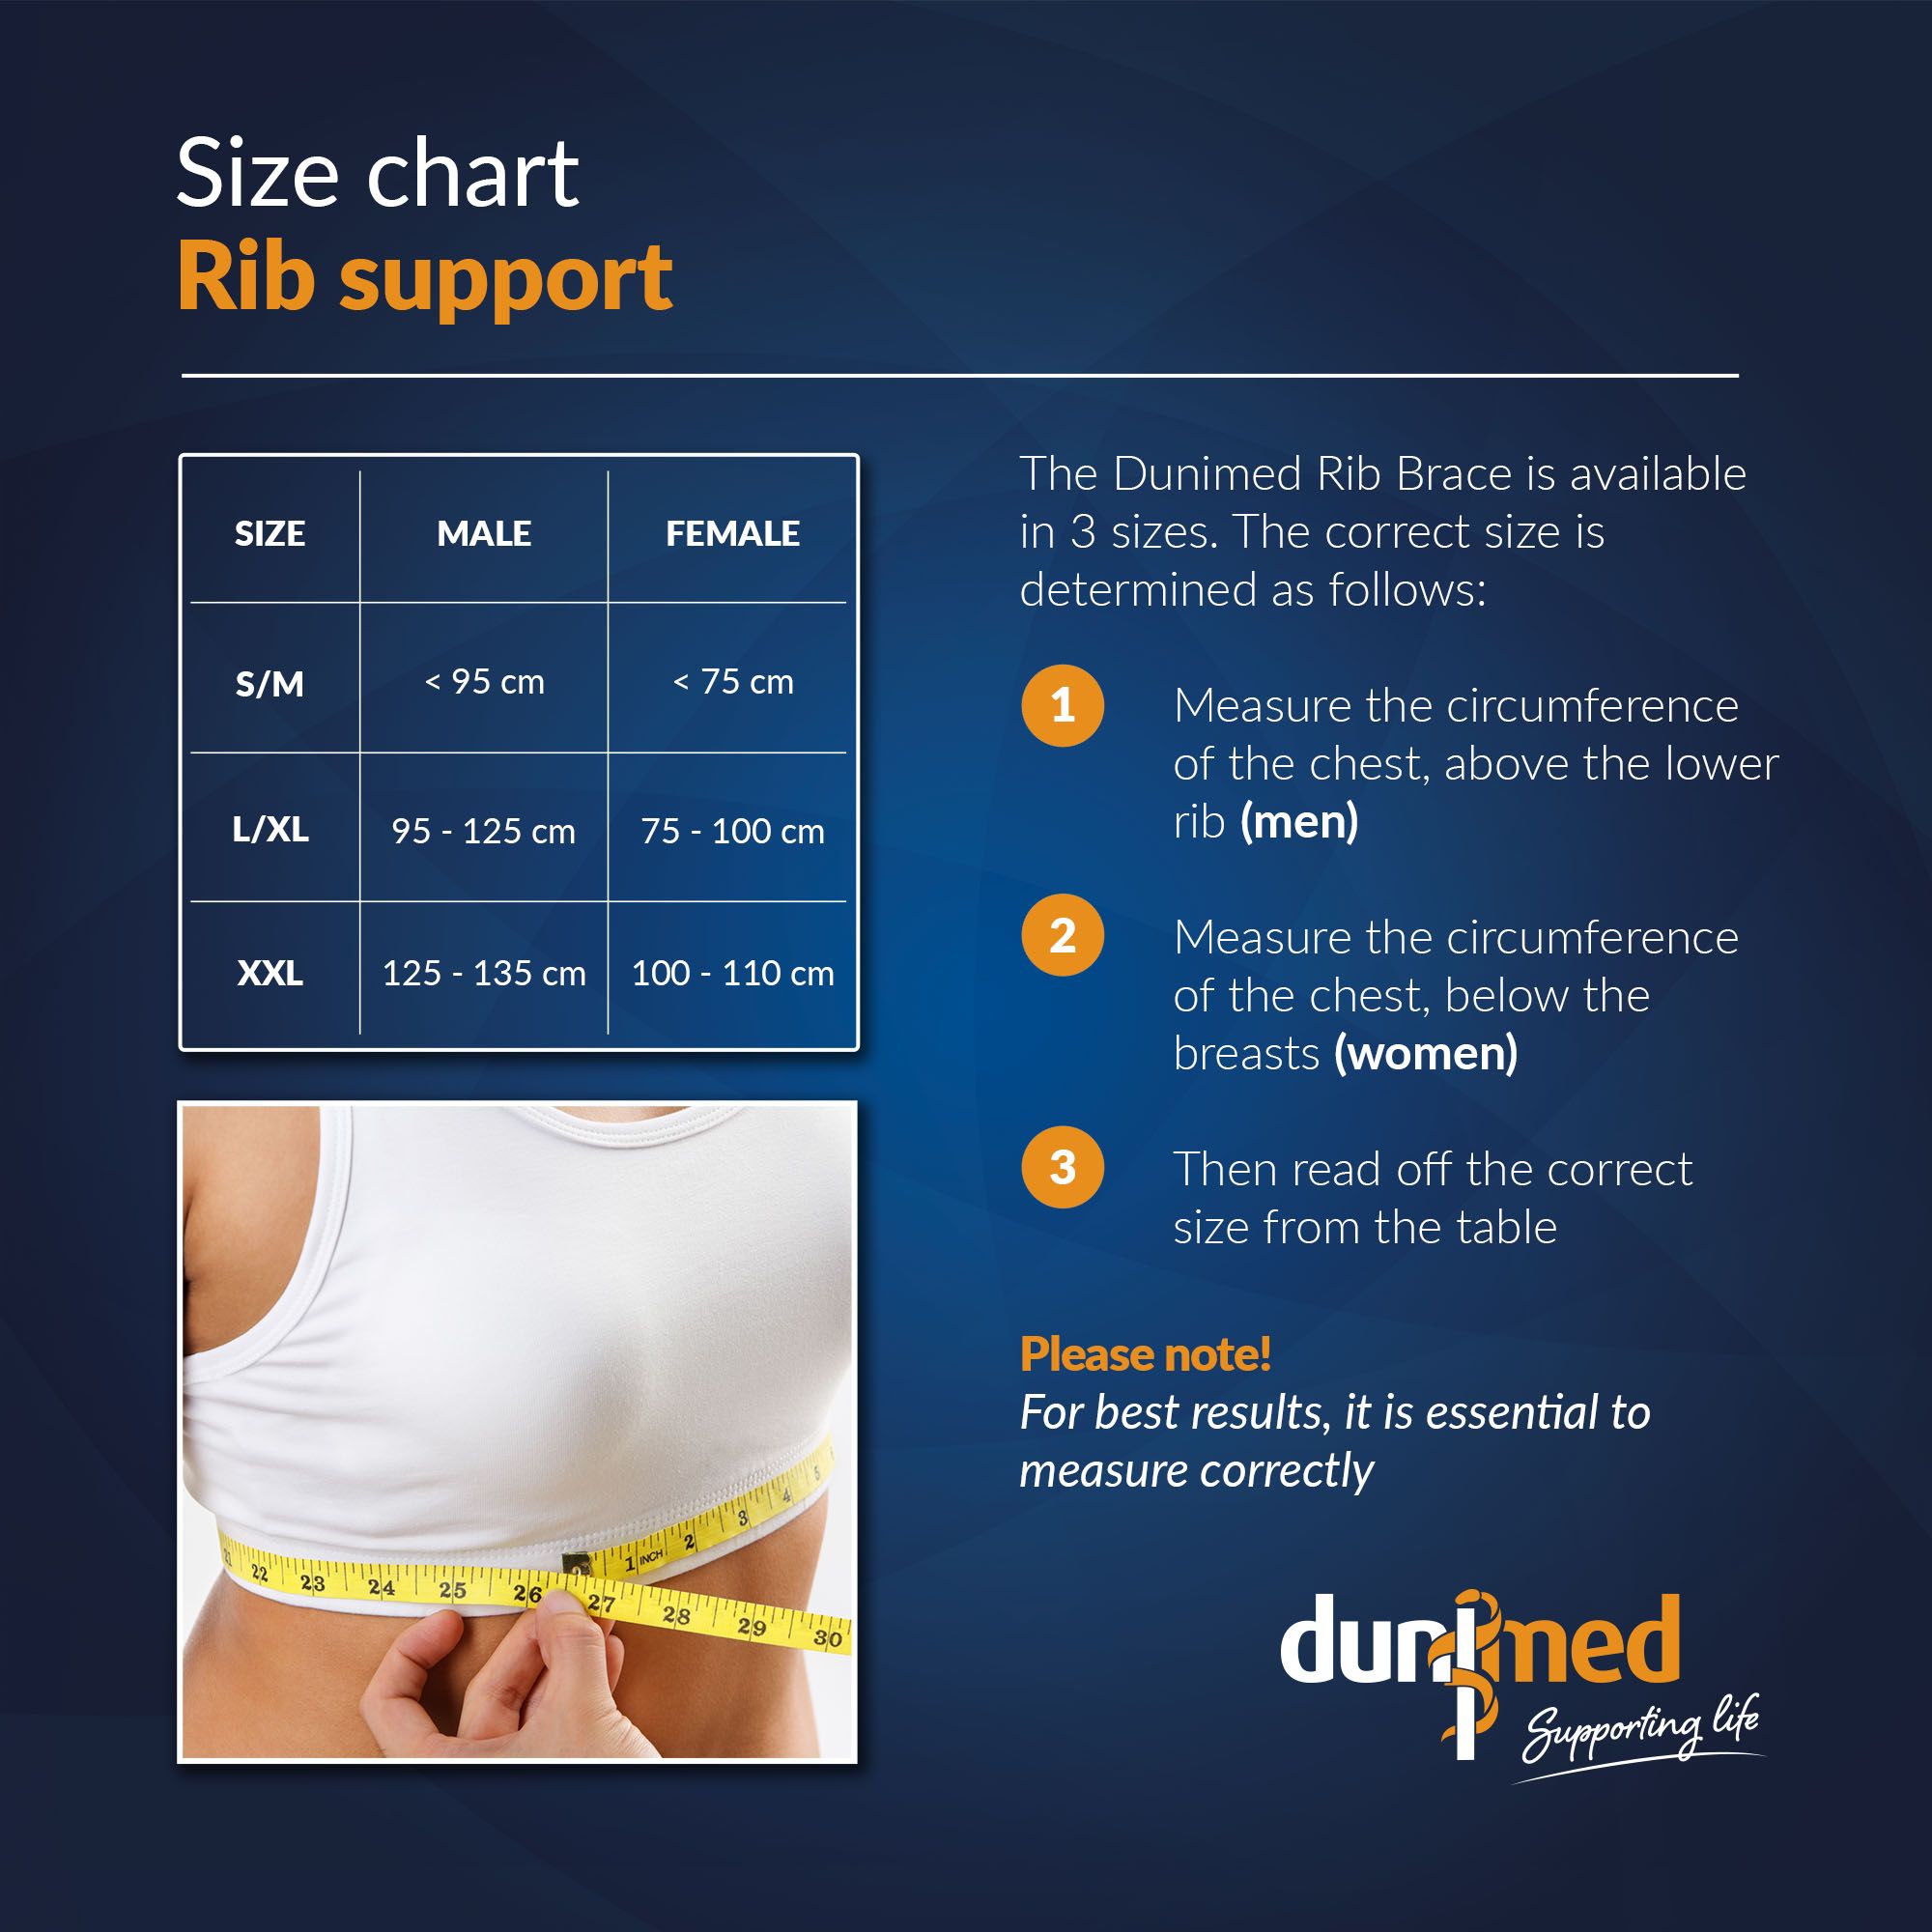 Size chart Dunimed Rib Support